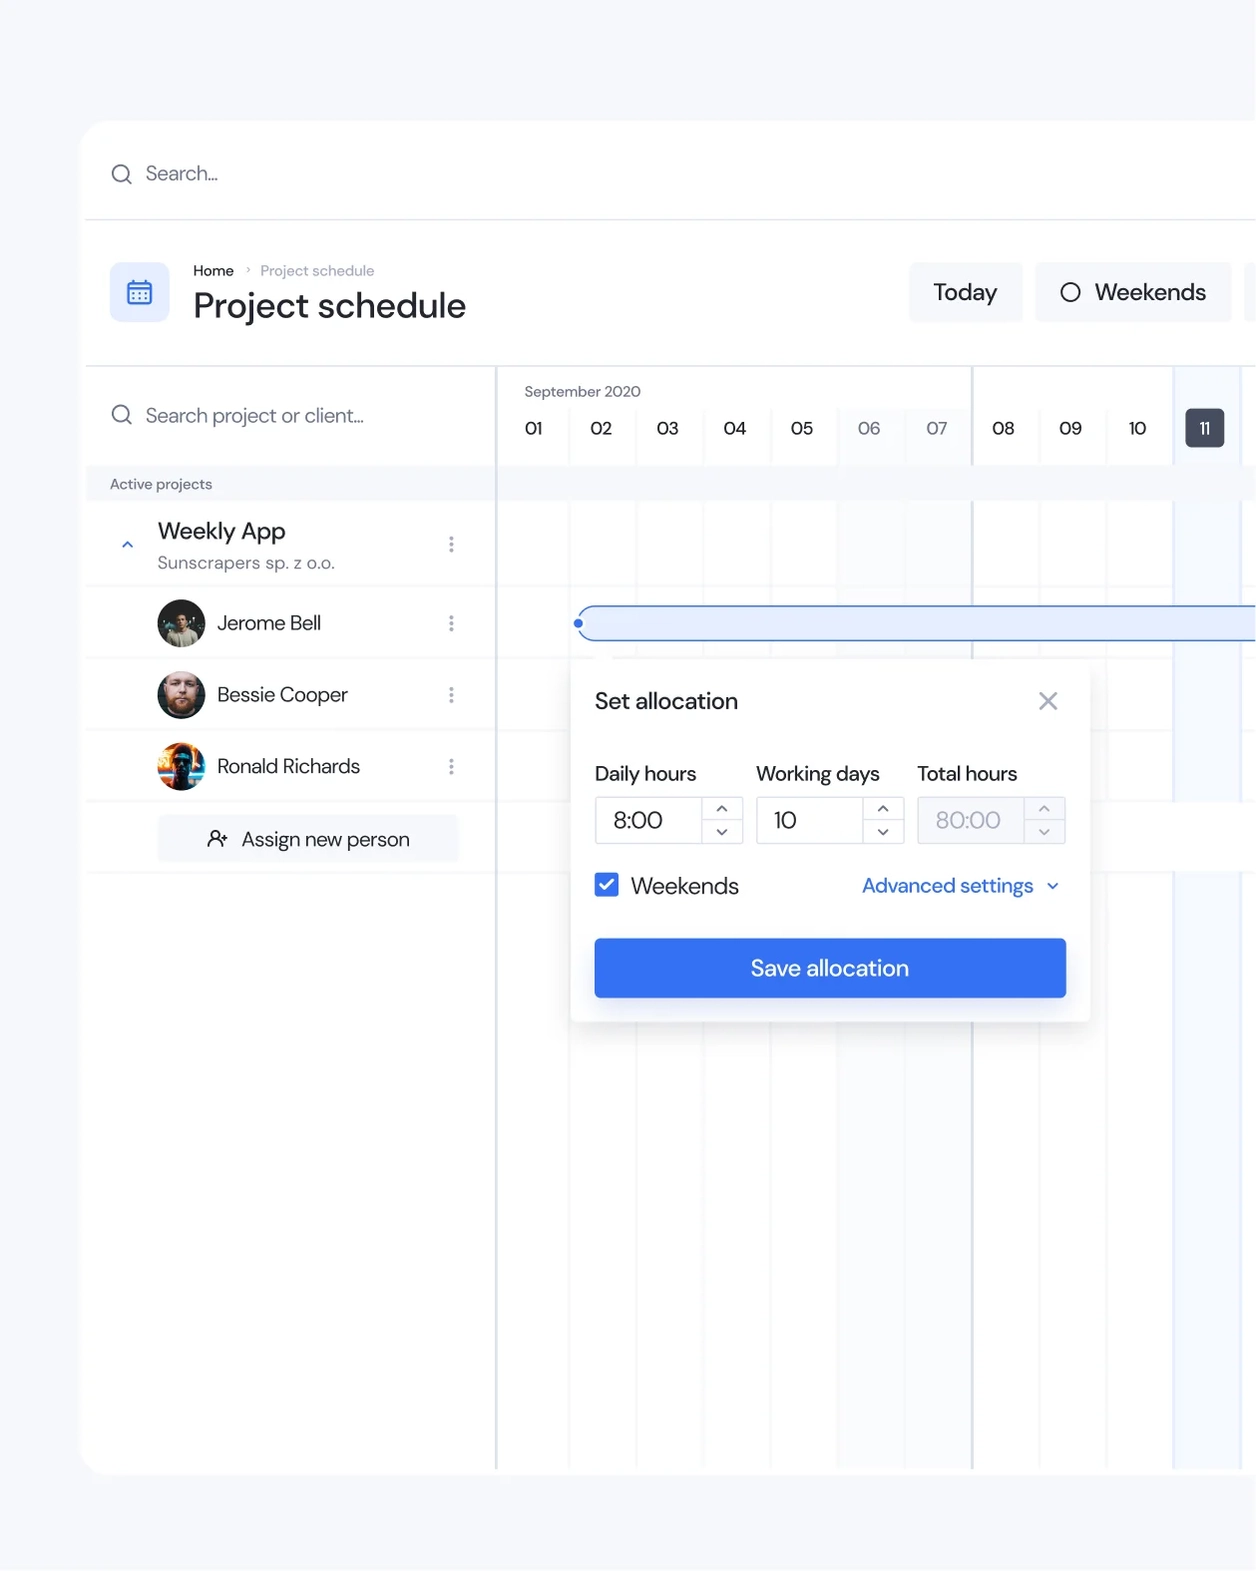 Project schedule view